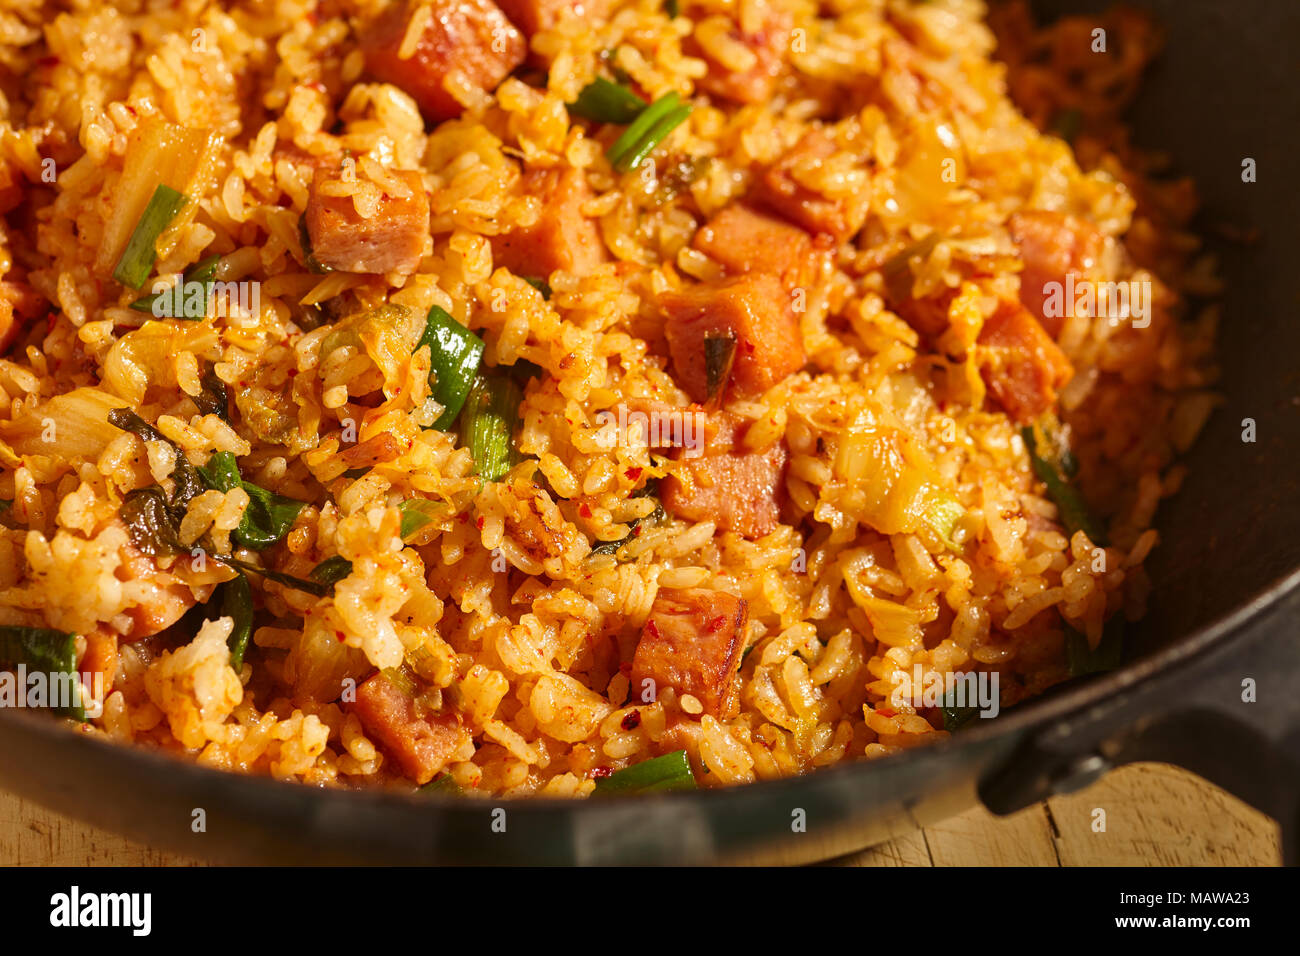 Spam and Kimchi fried rice in a black steel wok, a classic dish in Korean home cooking Stock Photo